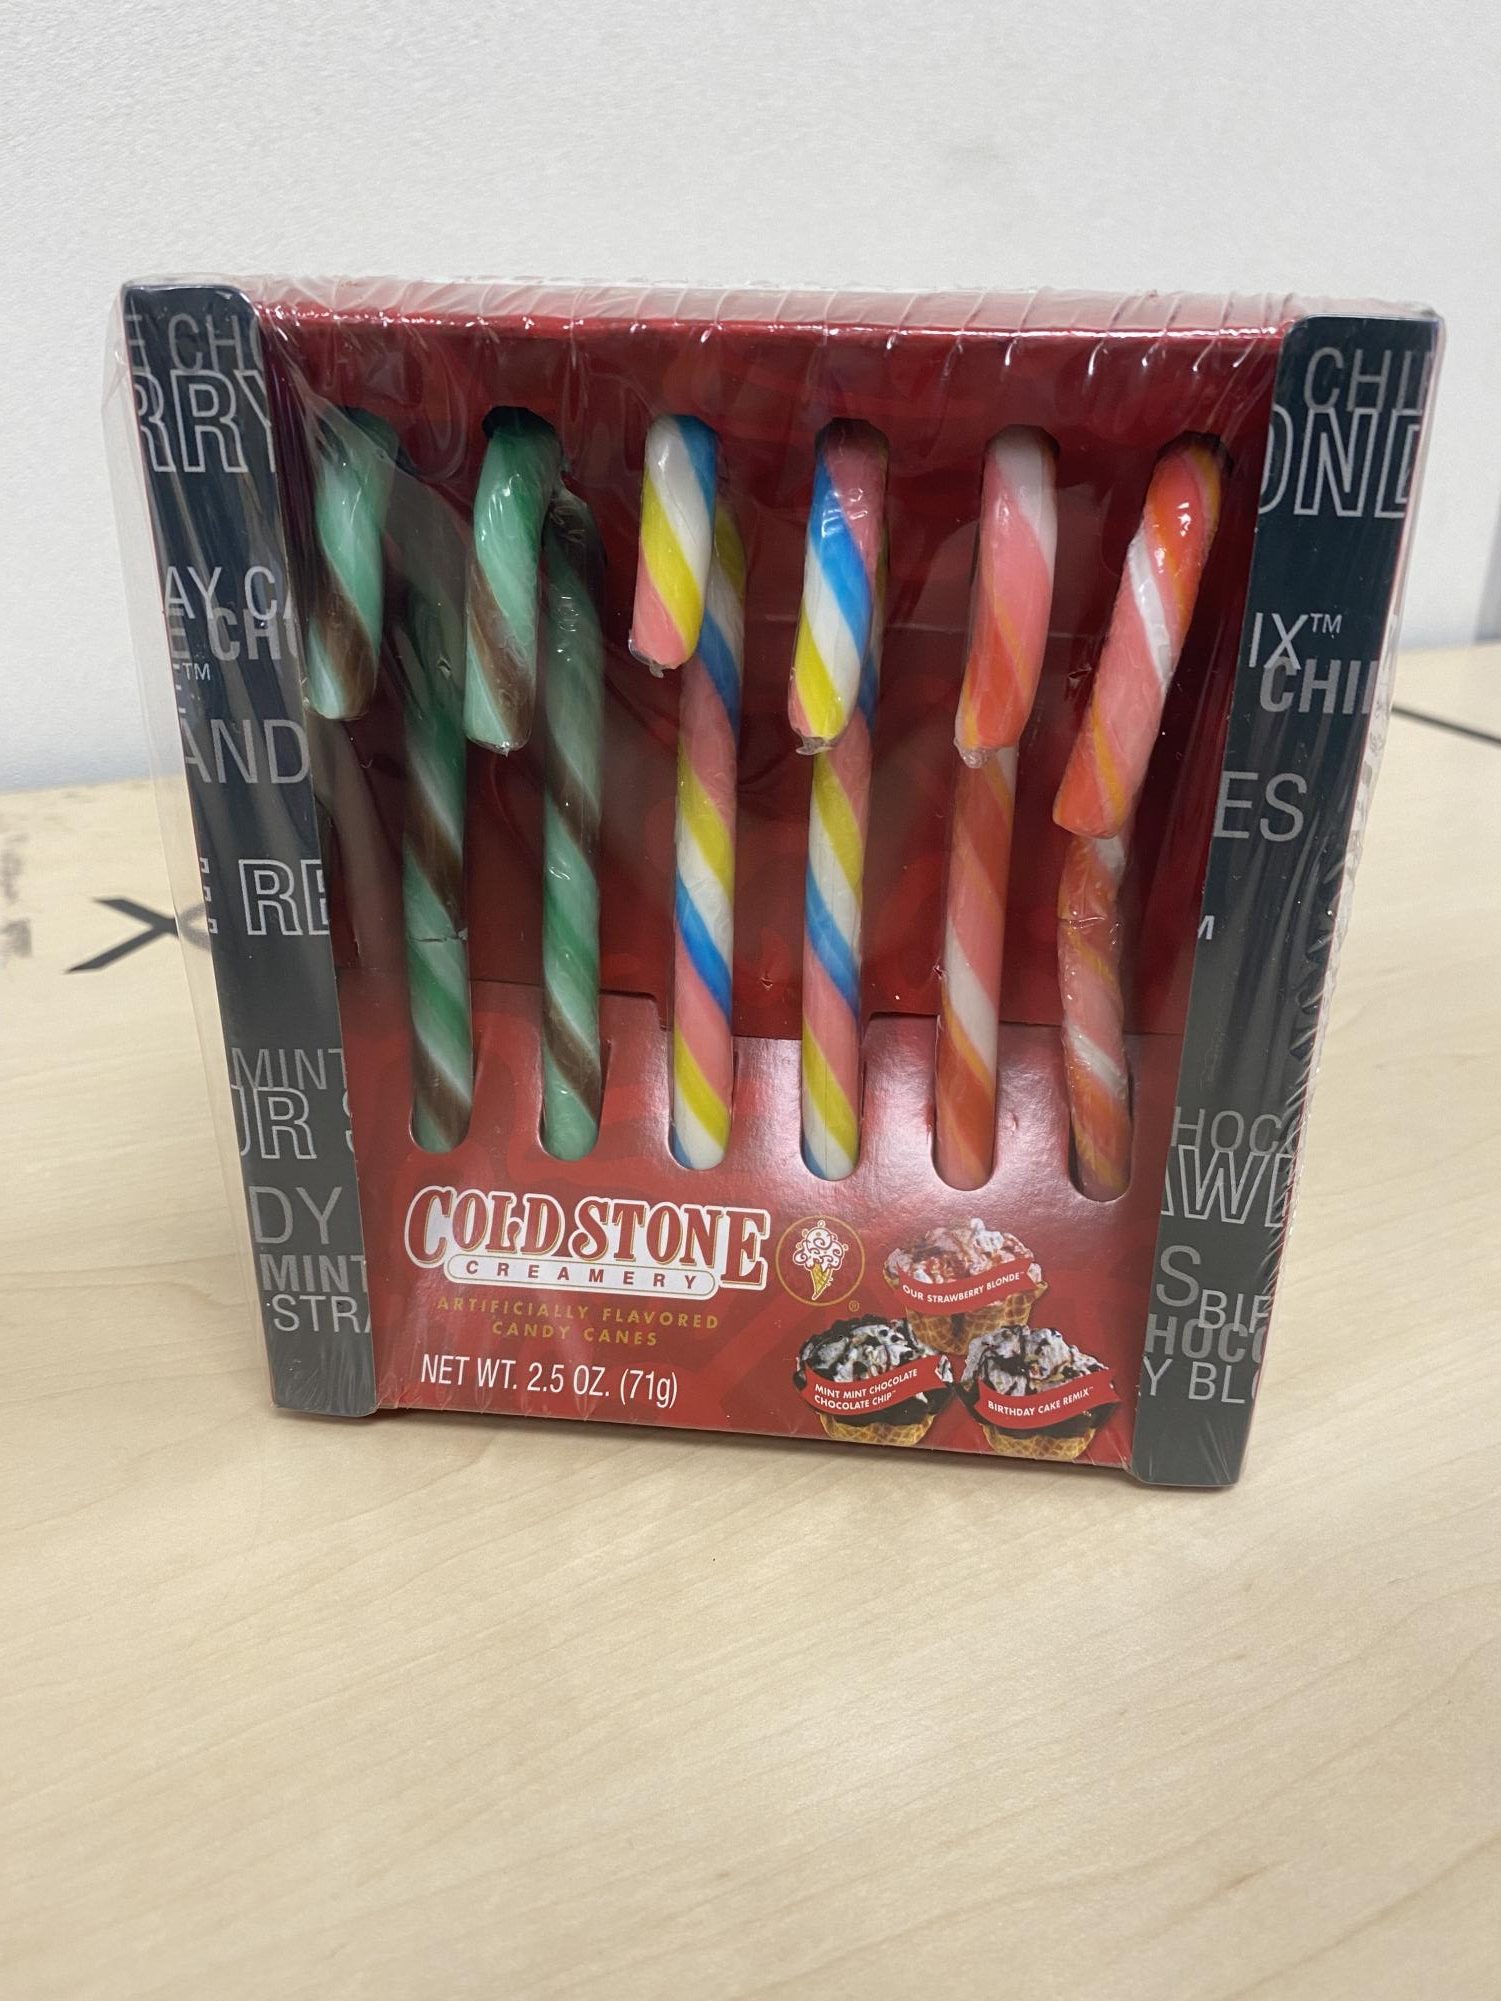 Birthday cake candy canes